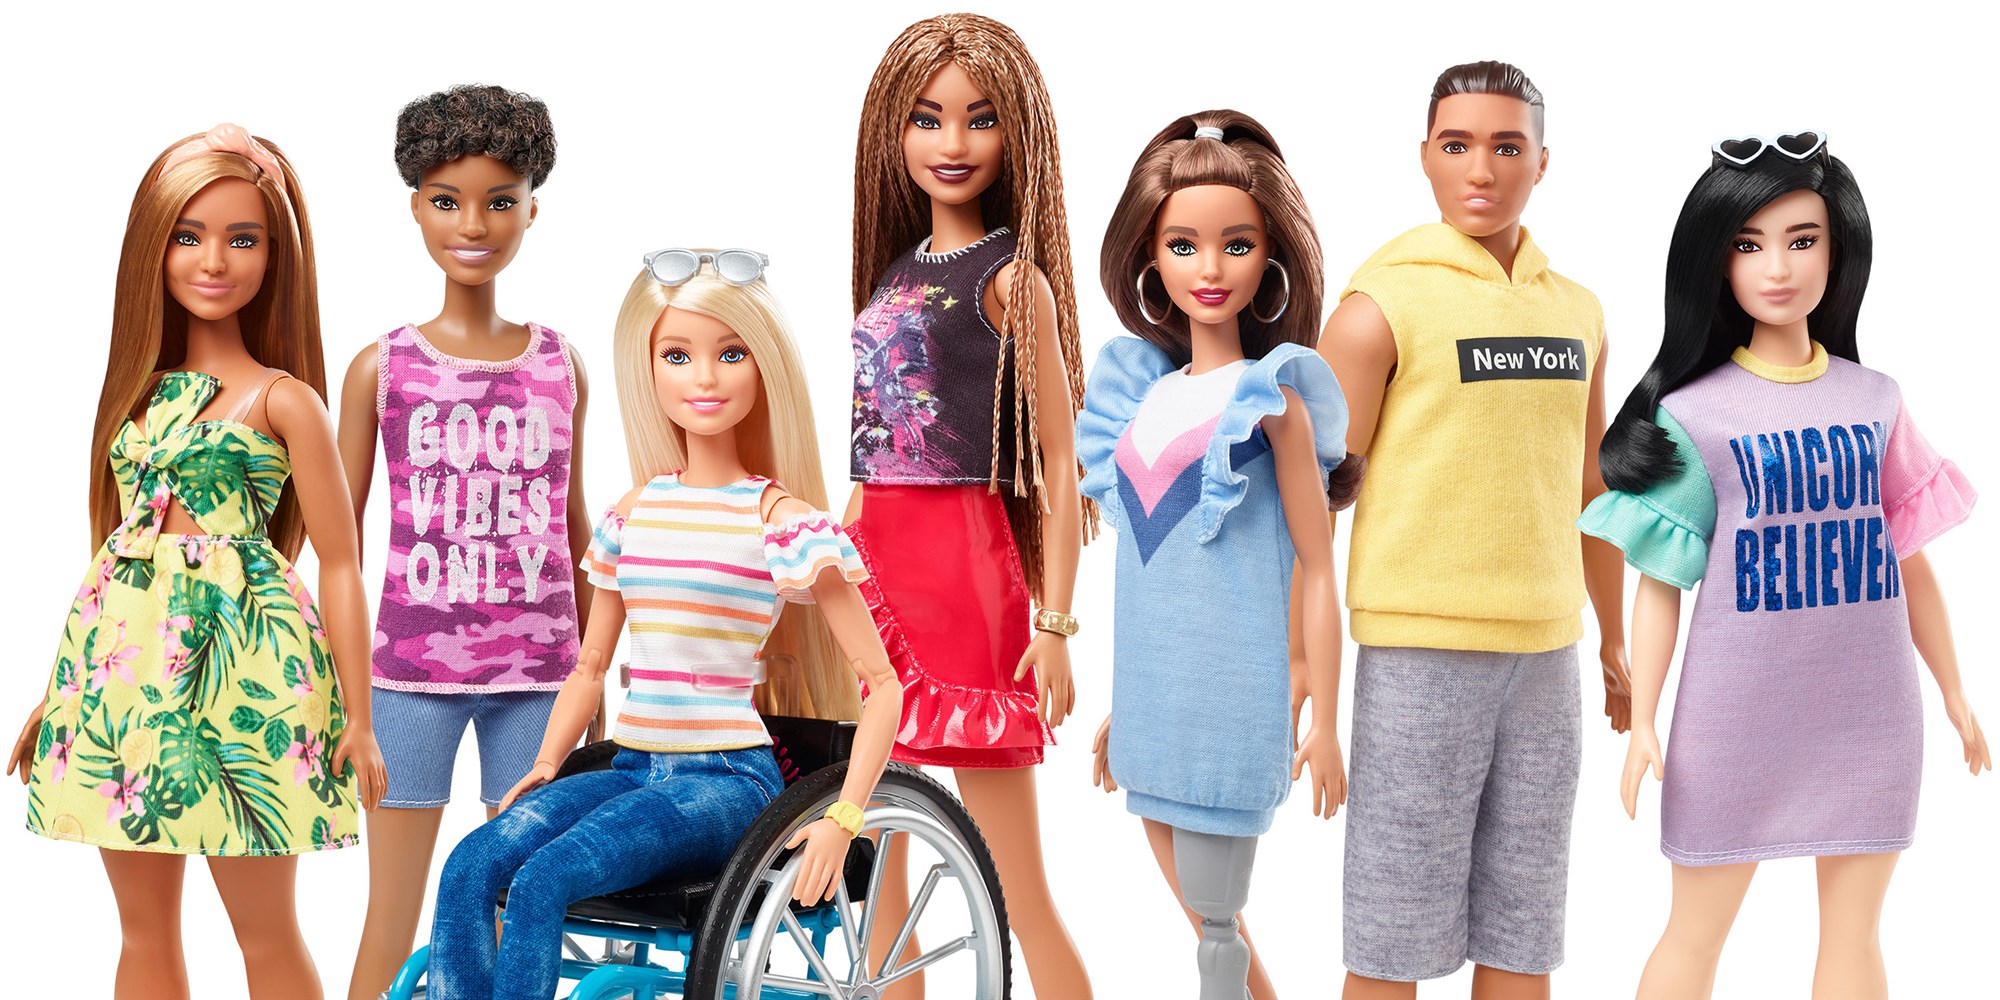 Barbie to unveil new dolls with wheelchairs, prosthetic limbs